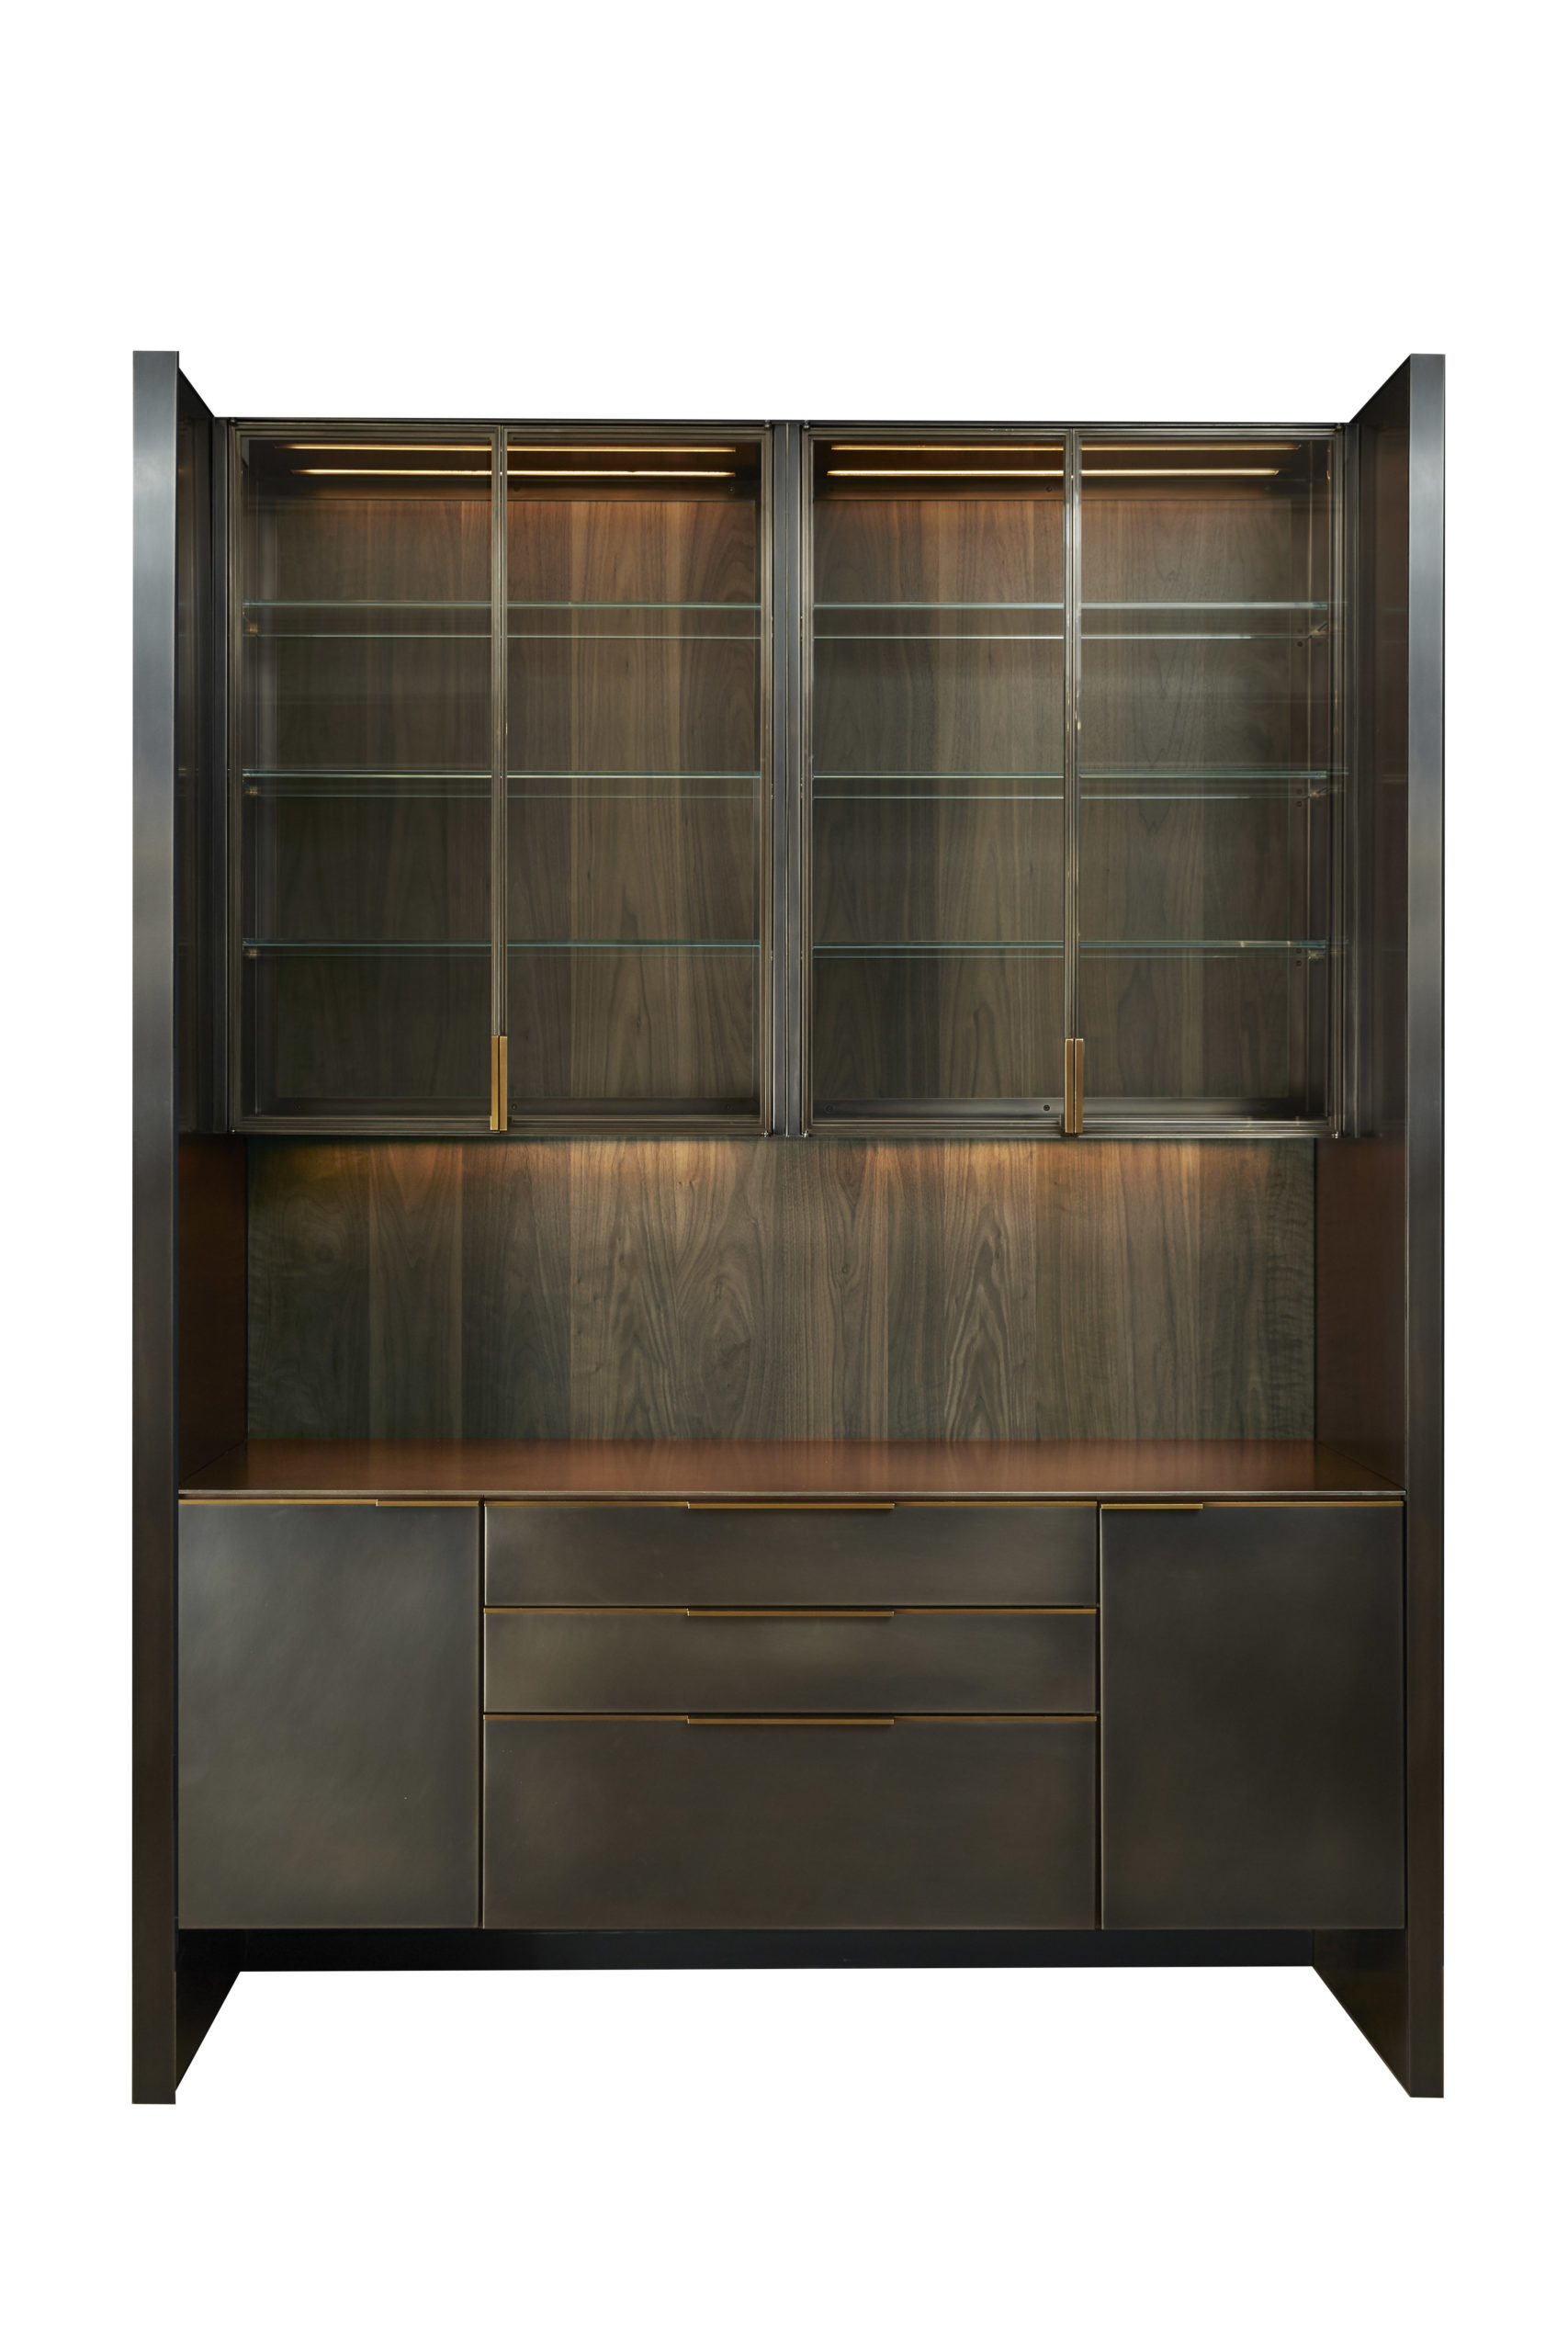 amuneal_products_WNWN_NYDC_1Blackened-Stainless-Bar-Front-Empty-Whited-Out_nycshowroom-scaled-1